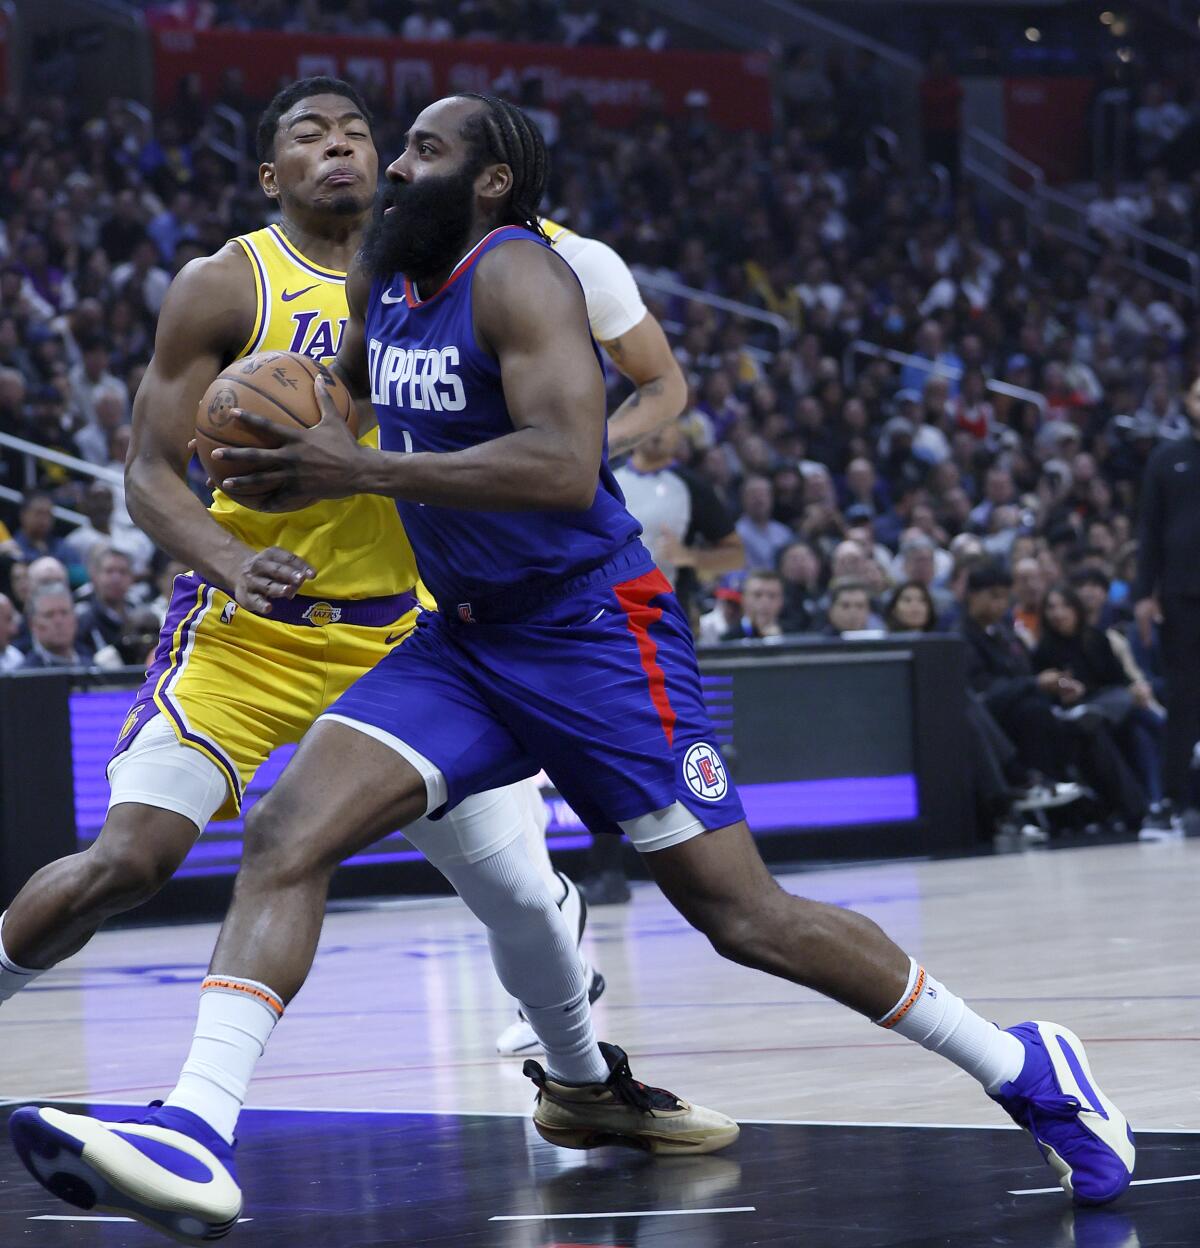 Clippers guard James Harden drives past Lakers forward Rui Hachimura during the first half of Tuesday's game.